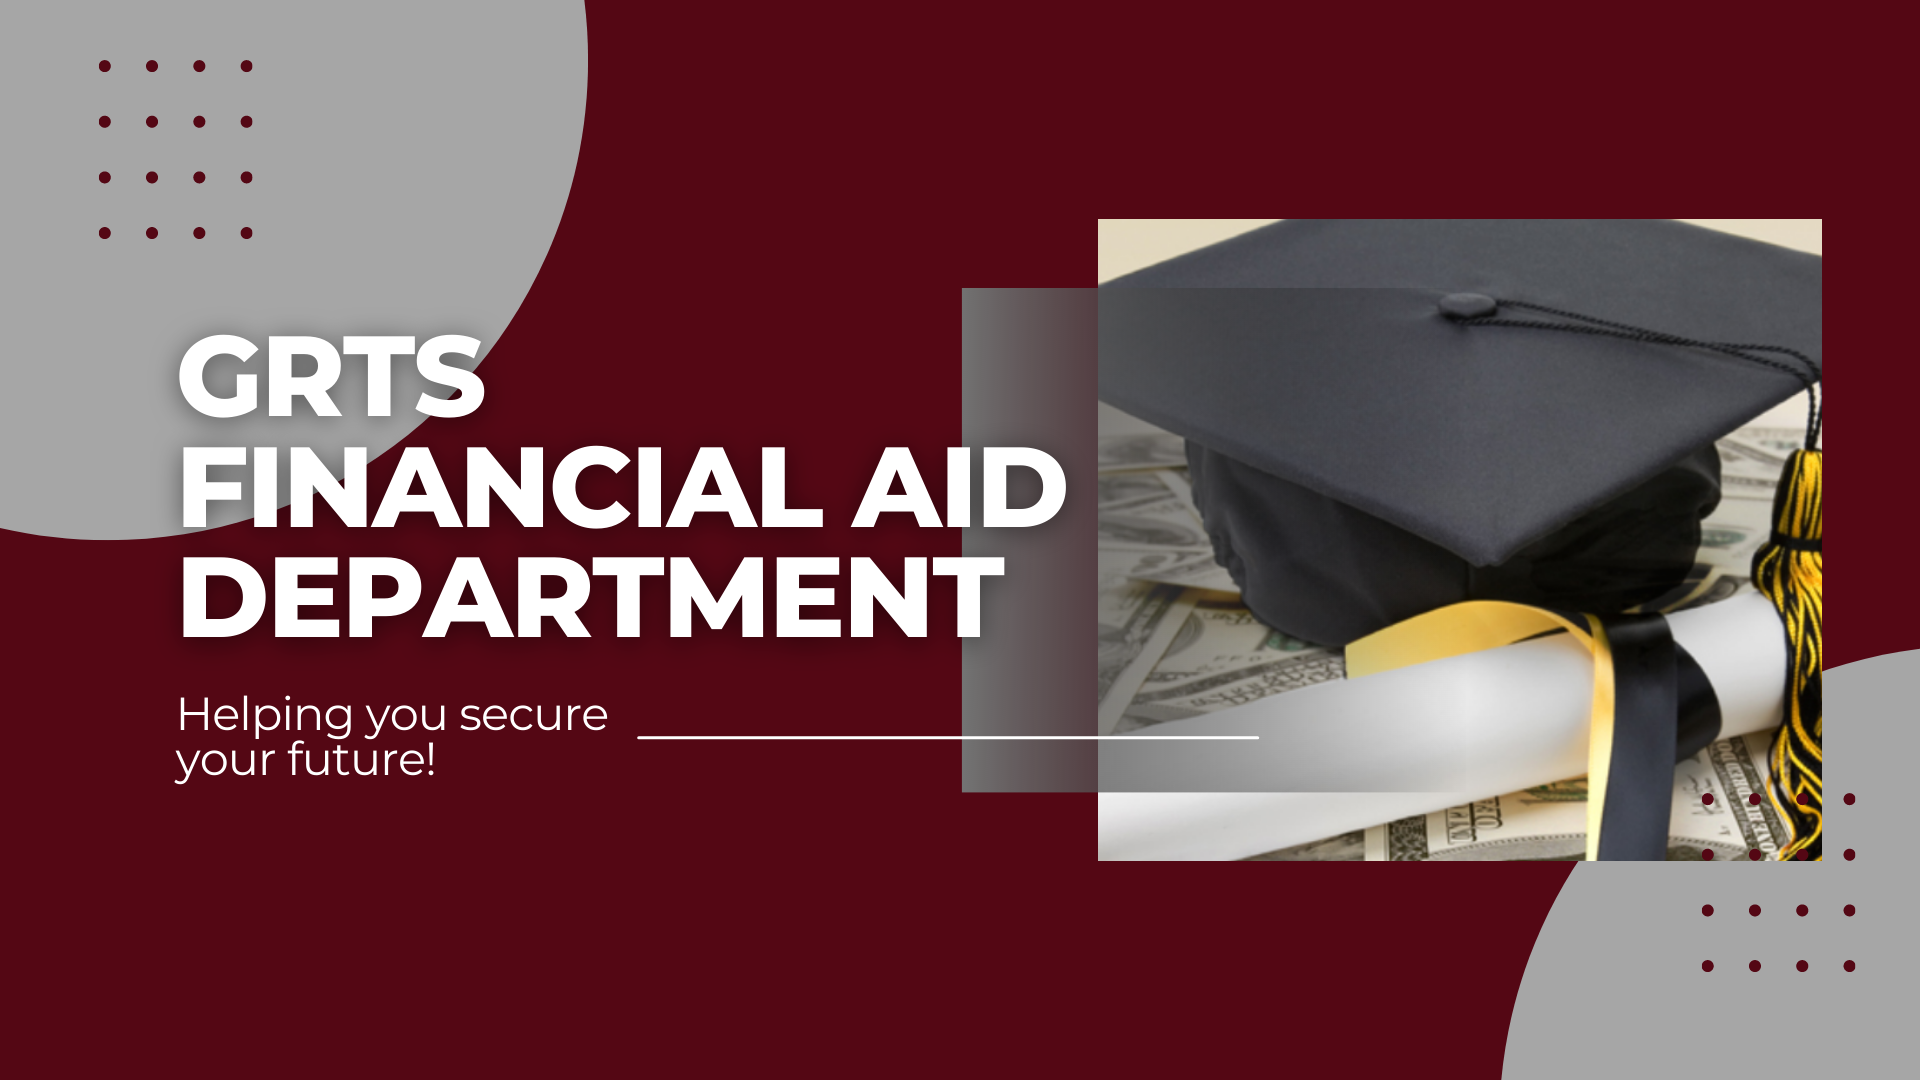 Financial aid helping students secure their future.